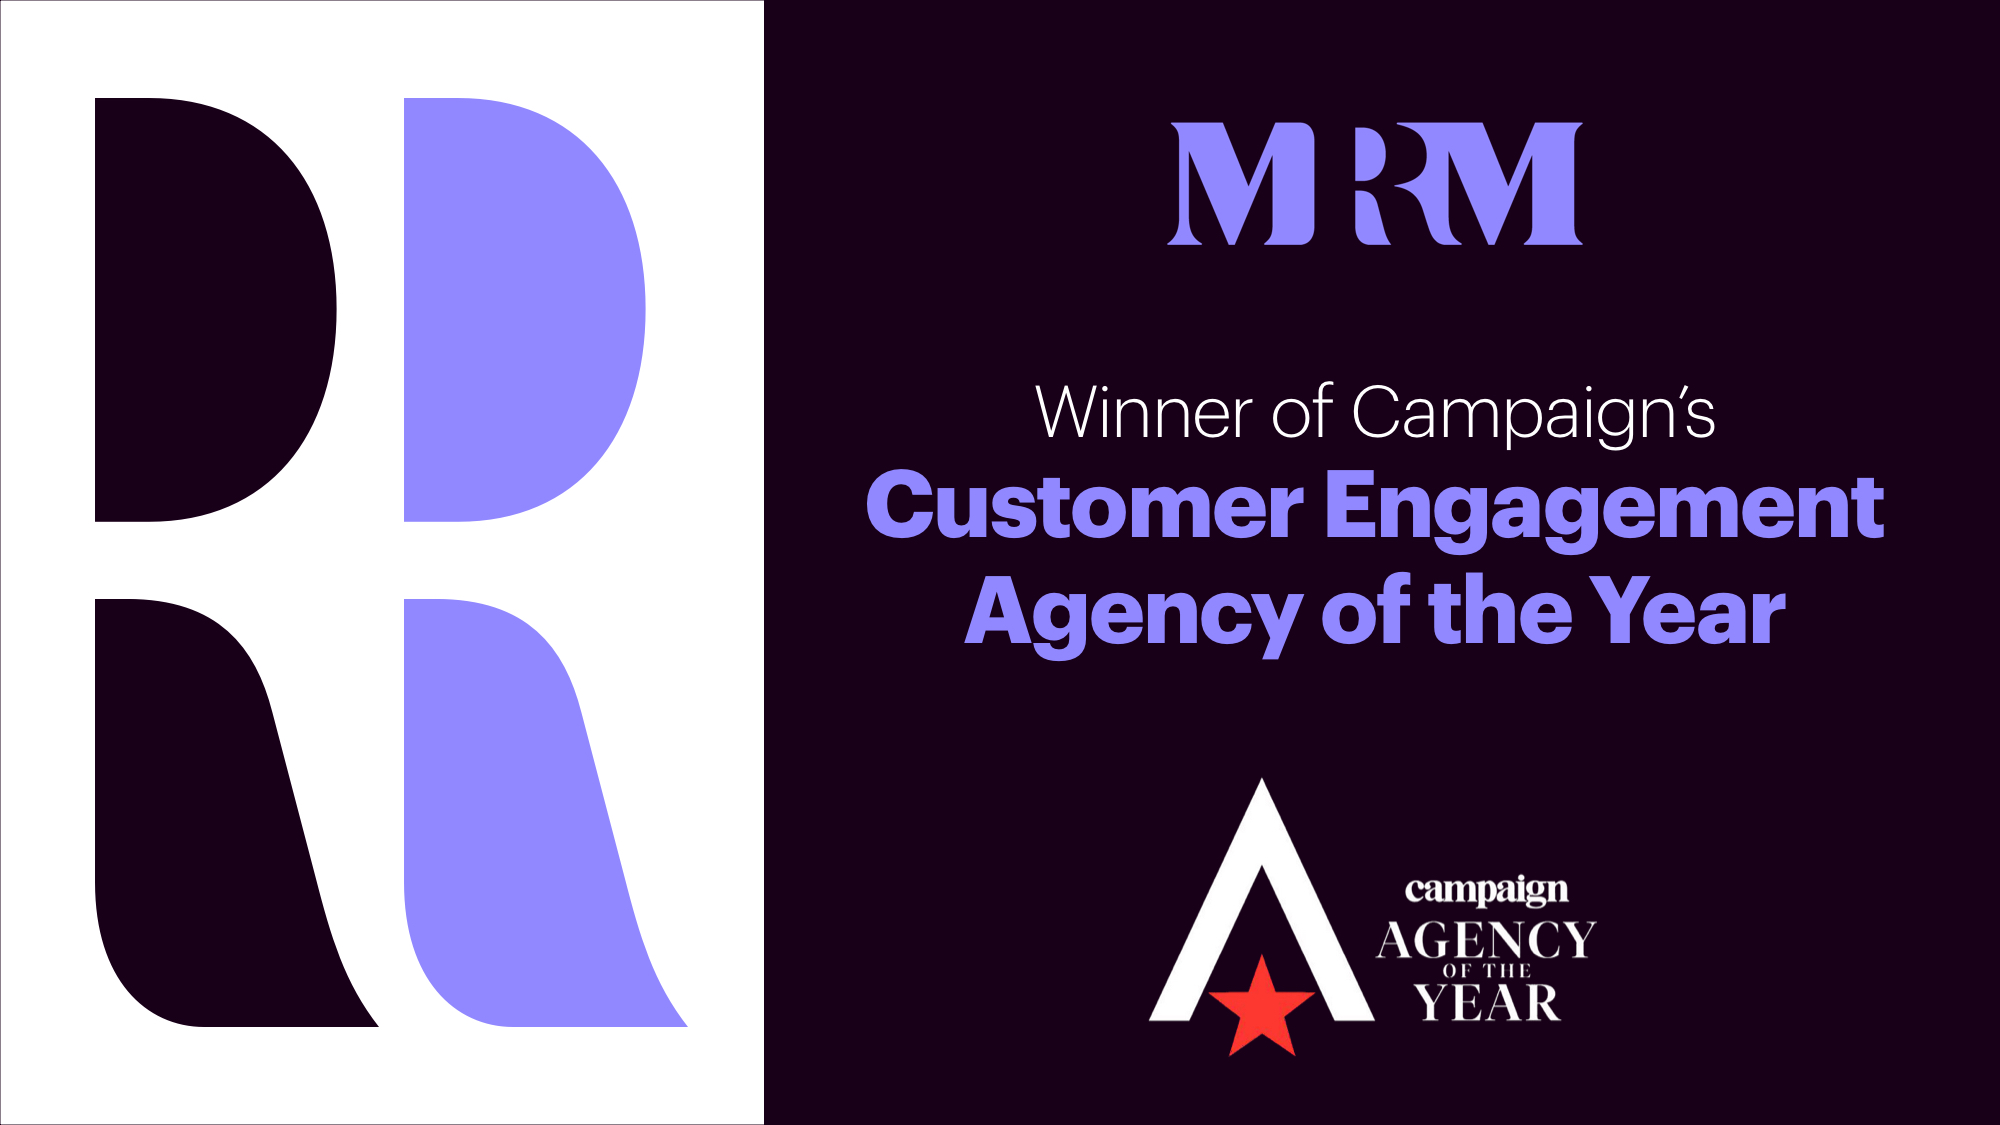 MRM logo - Winner of Campaign's Customer Engagement Agency of the Year 2021 - Campaign logo